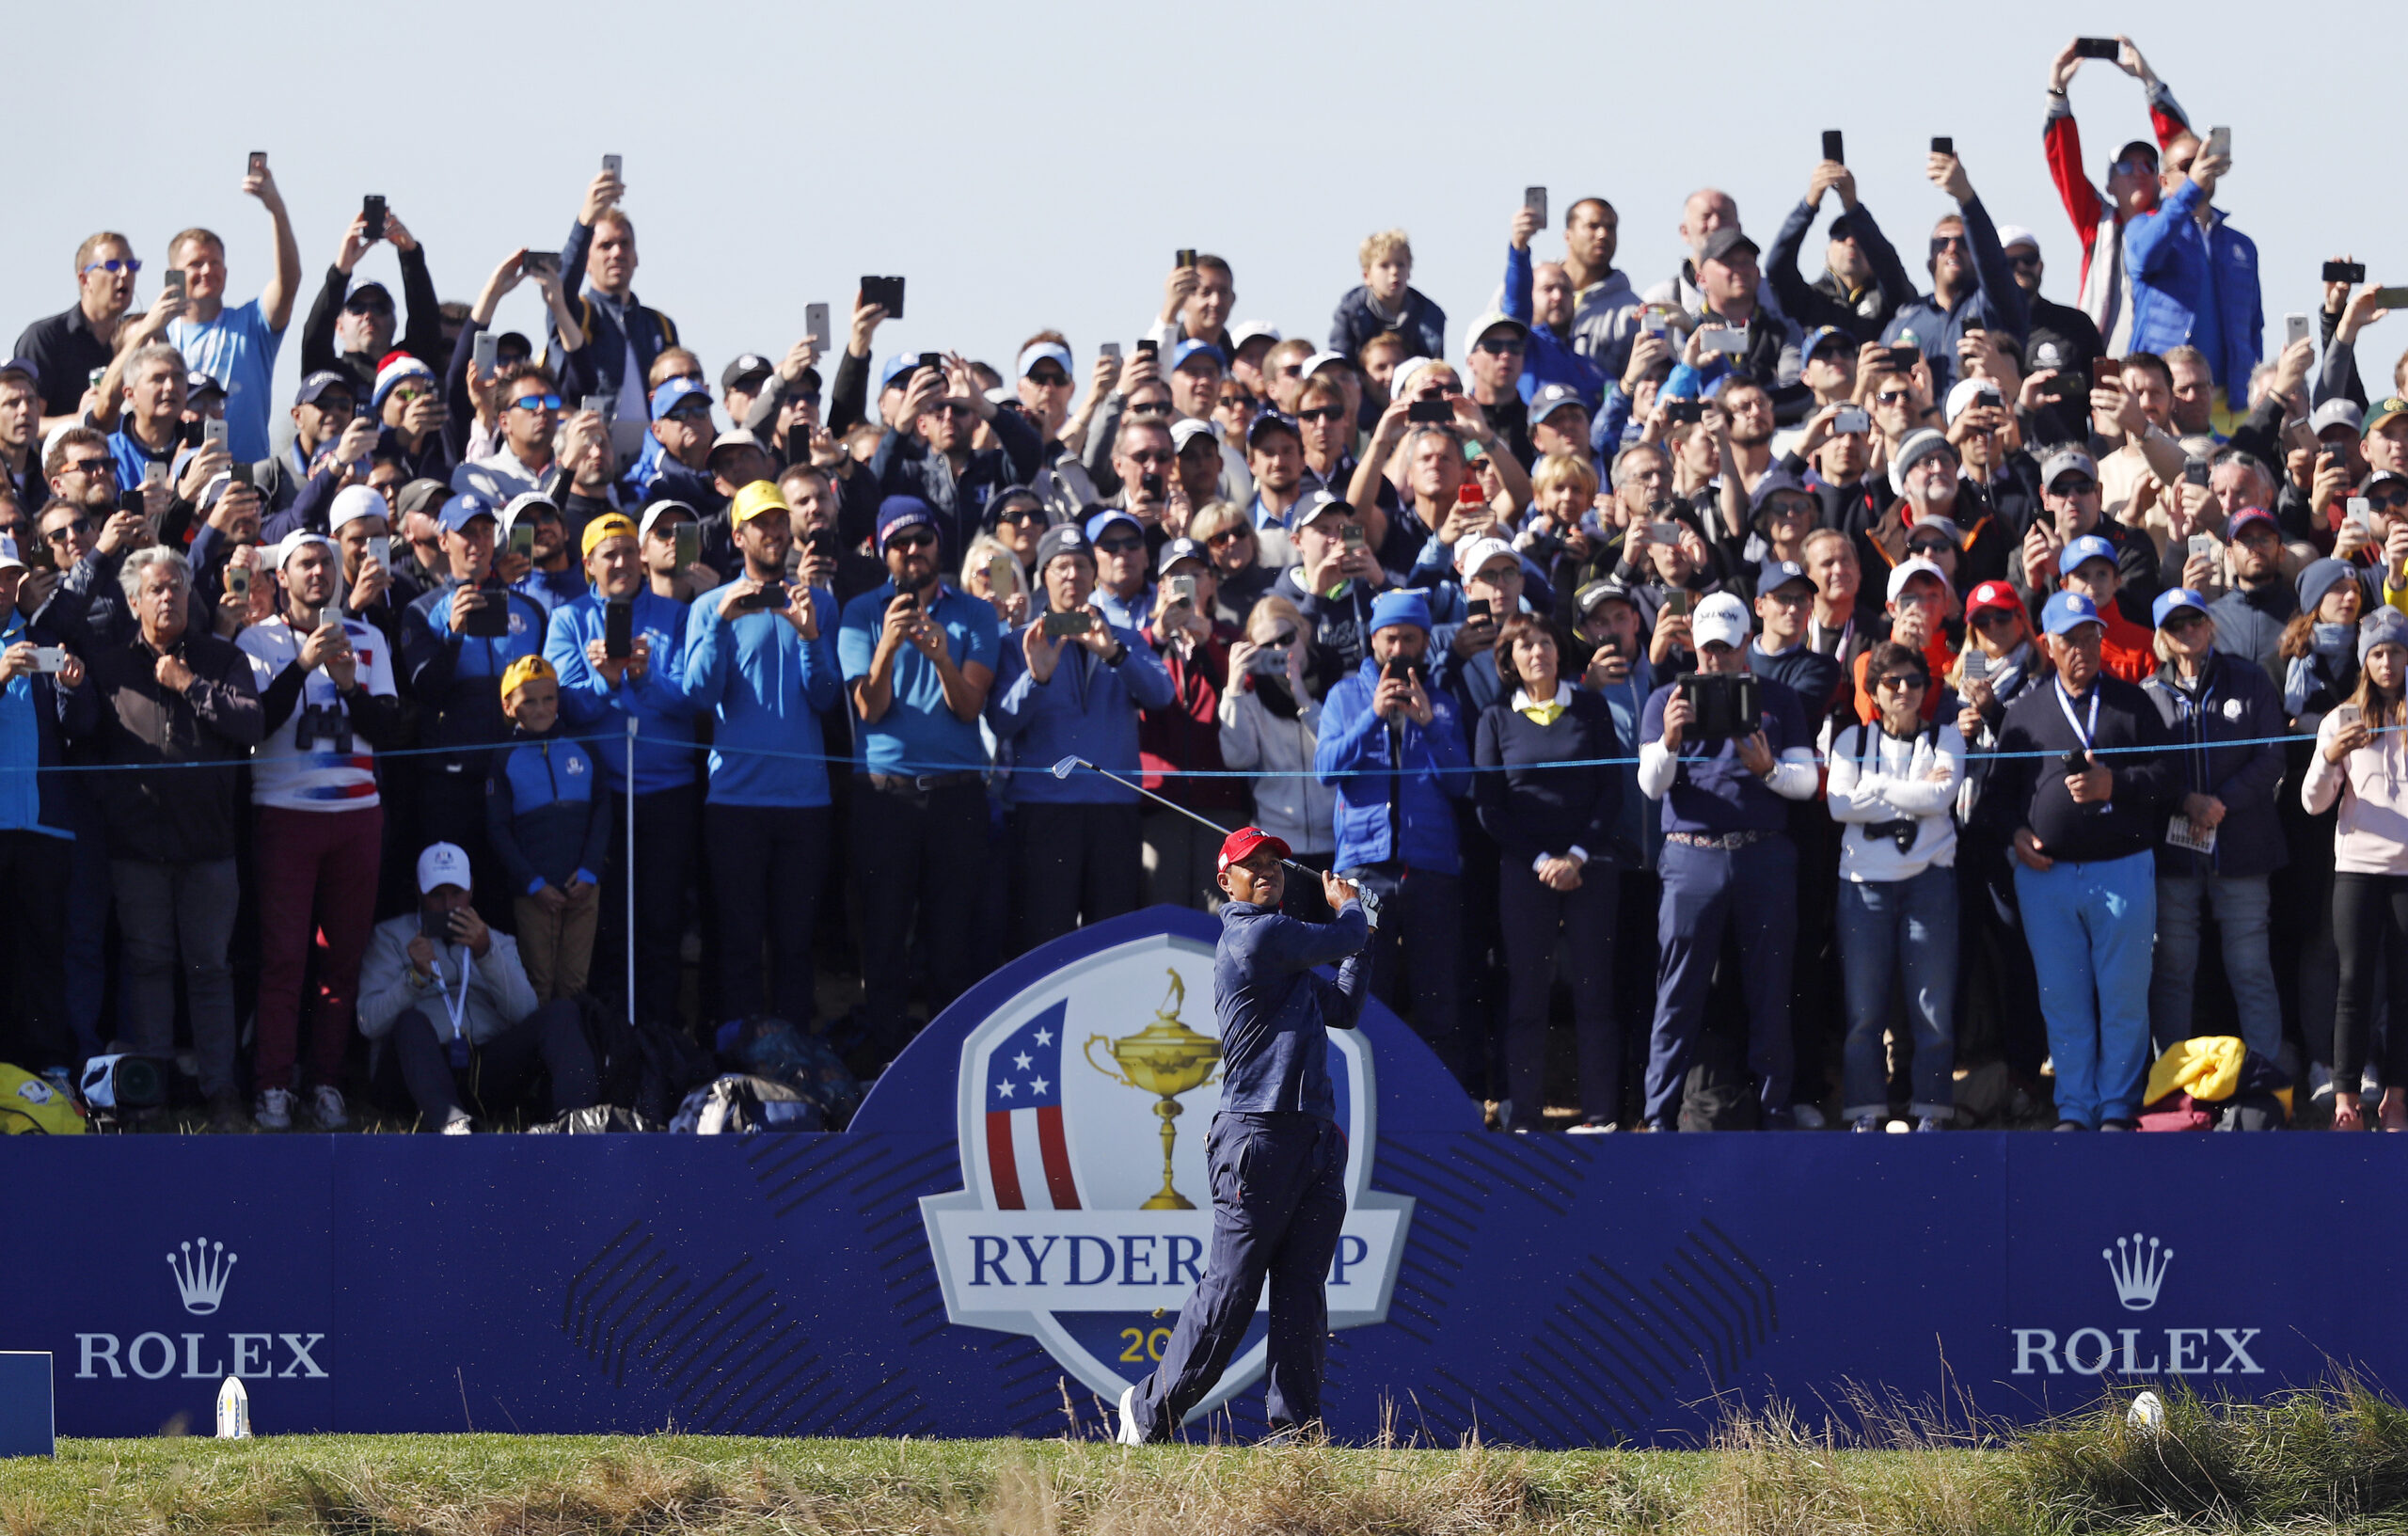 Tiger Woods plays a shot from the 4th tee at the 2018 Ryder Cup